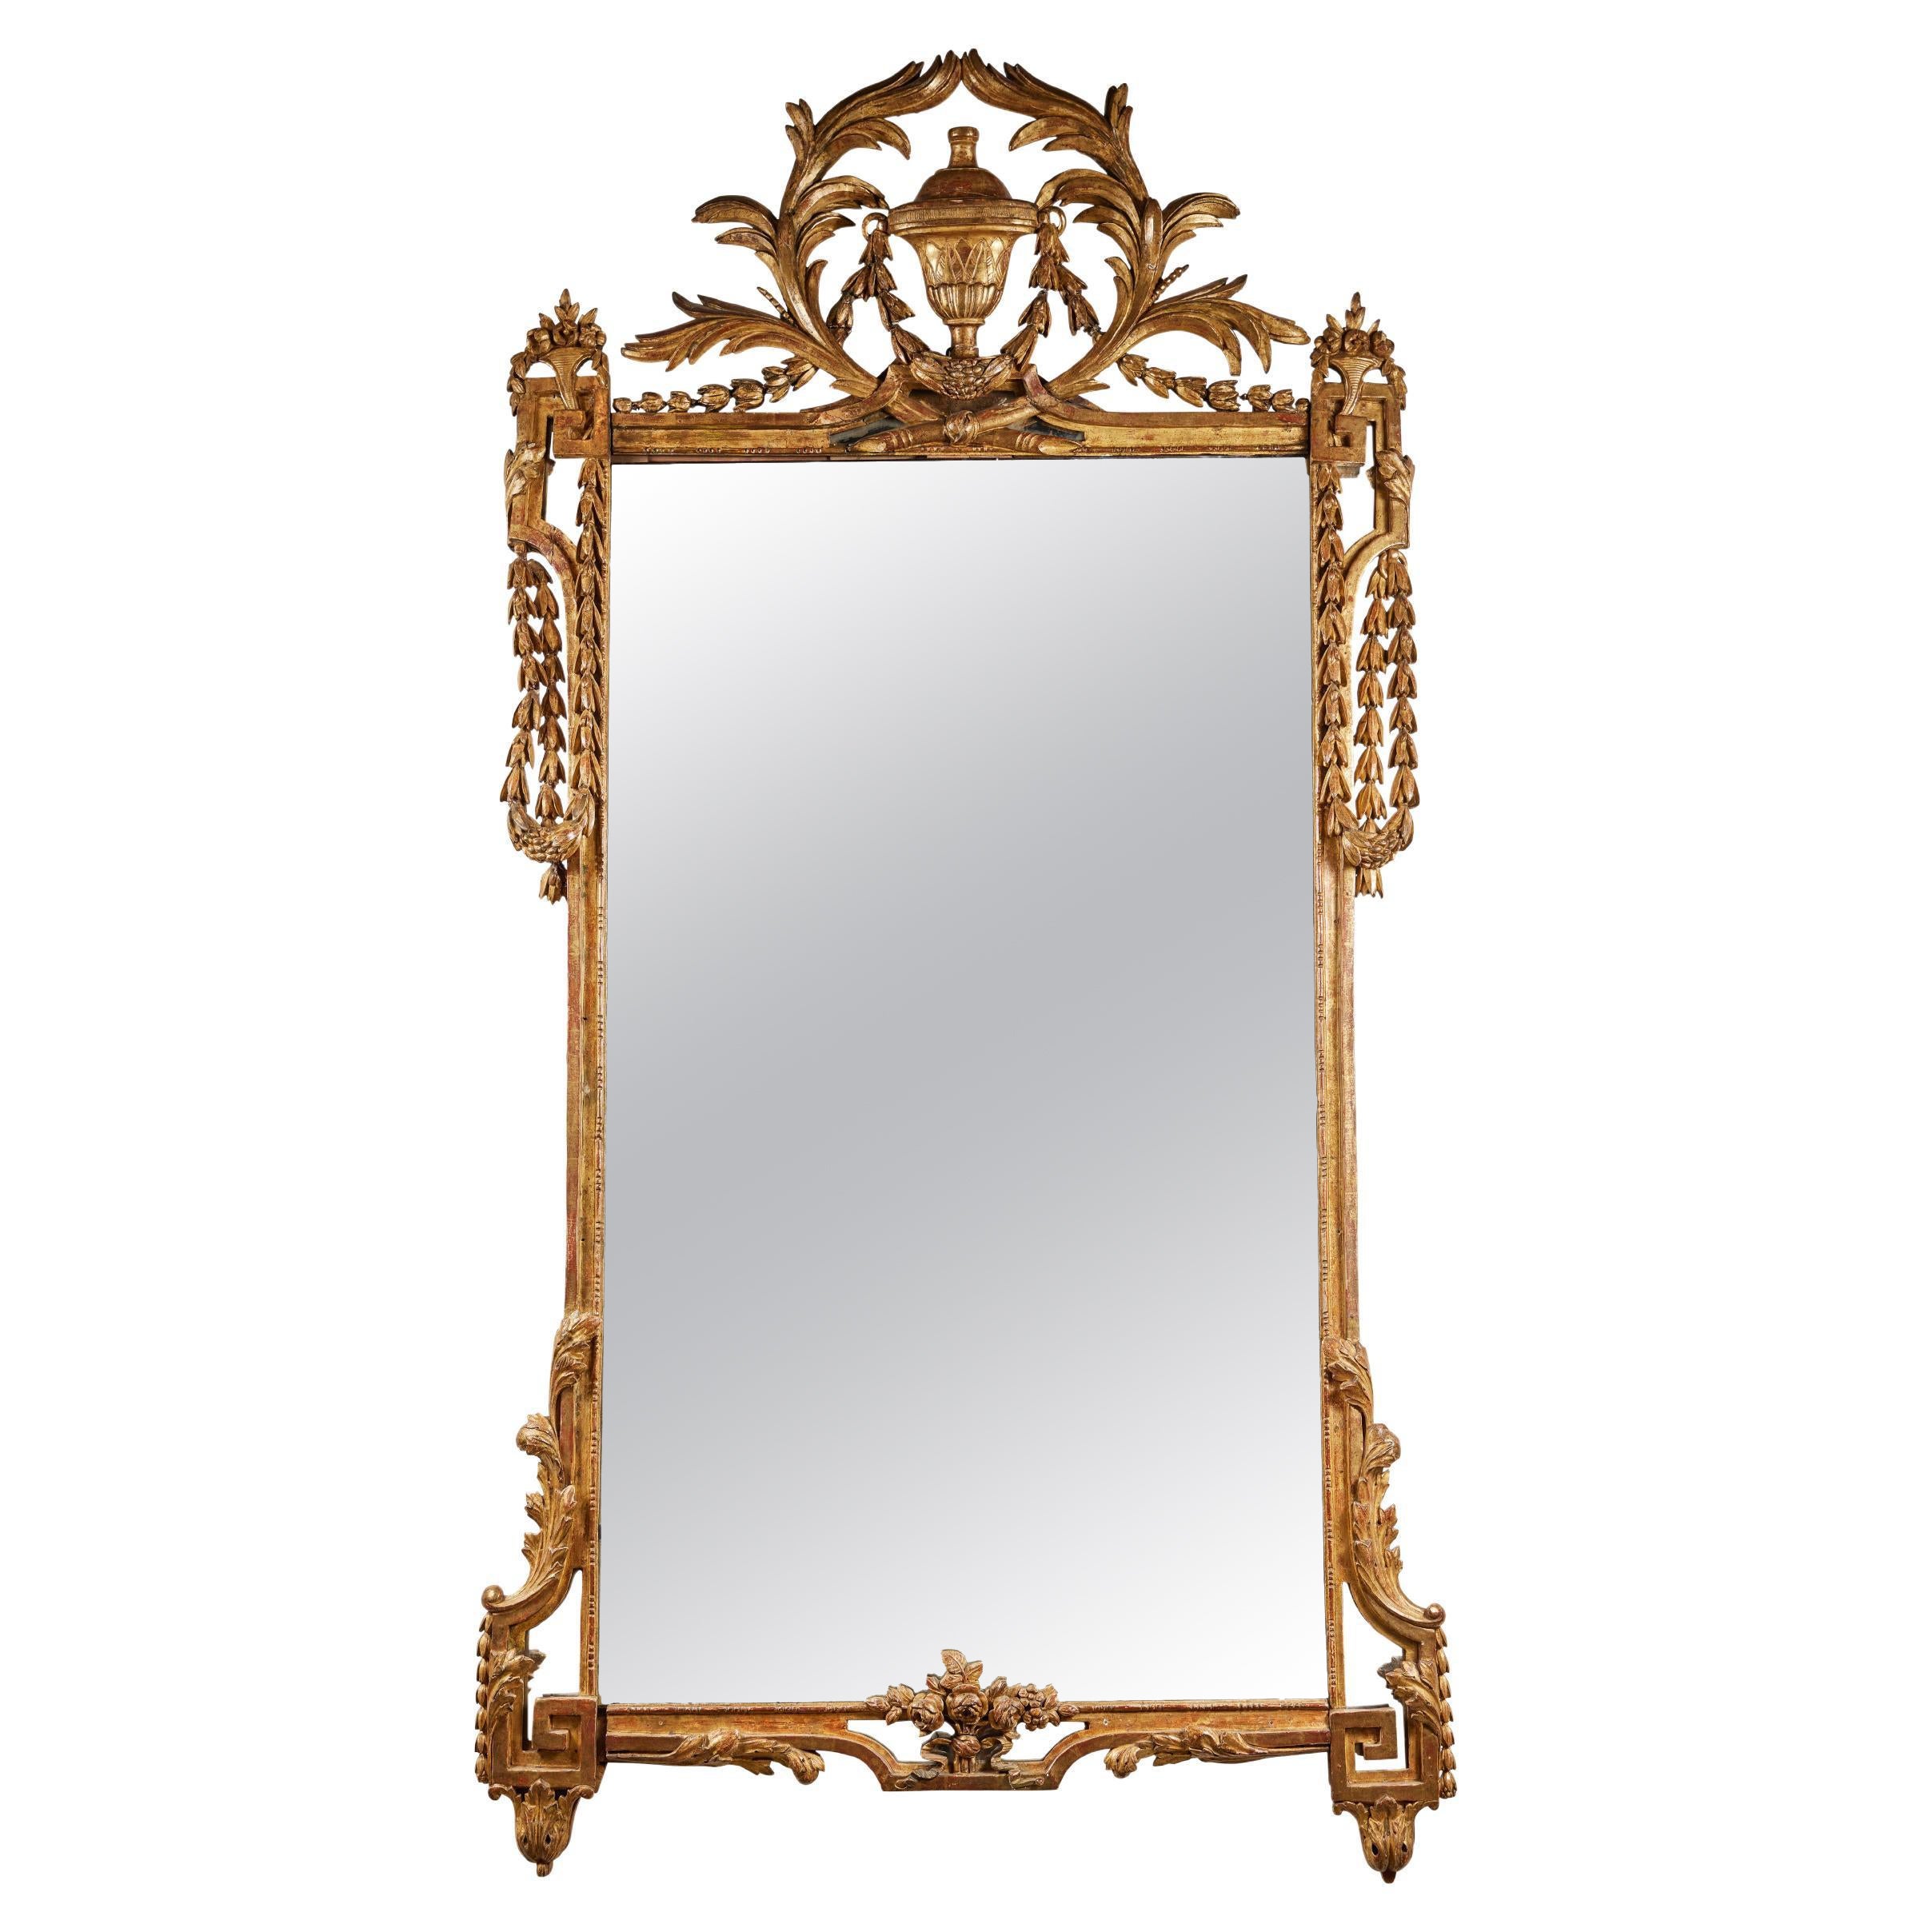 Large, Louis XVI Style Mirror For Sale at 1stDibs